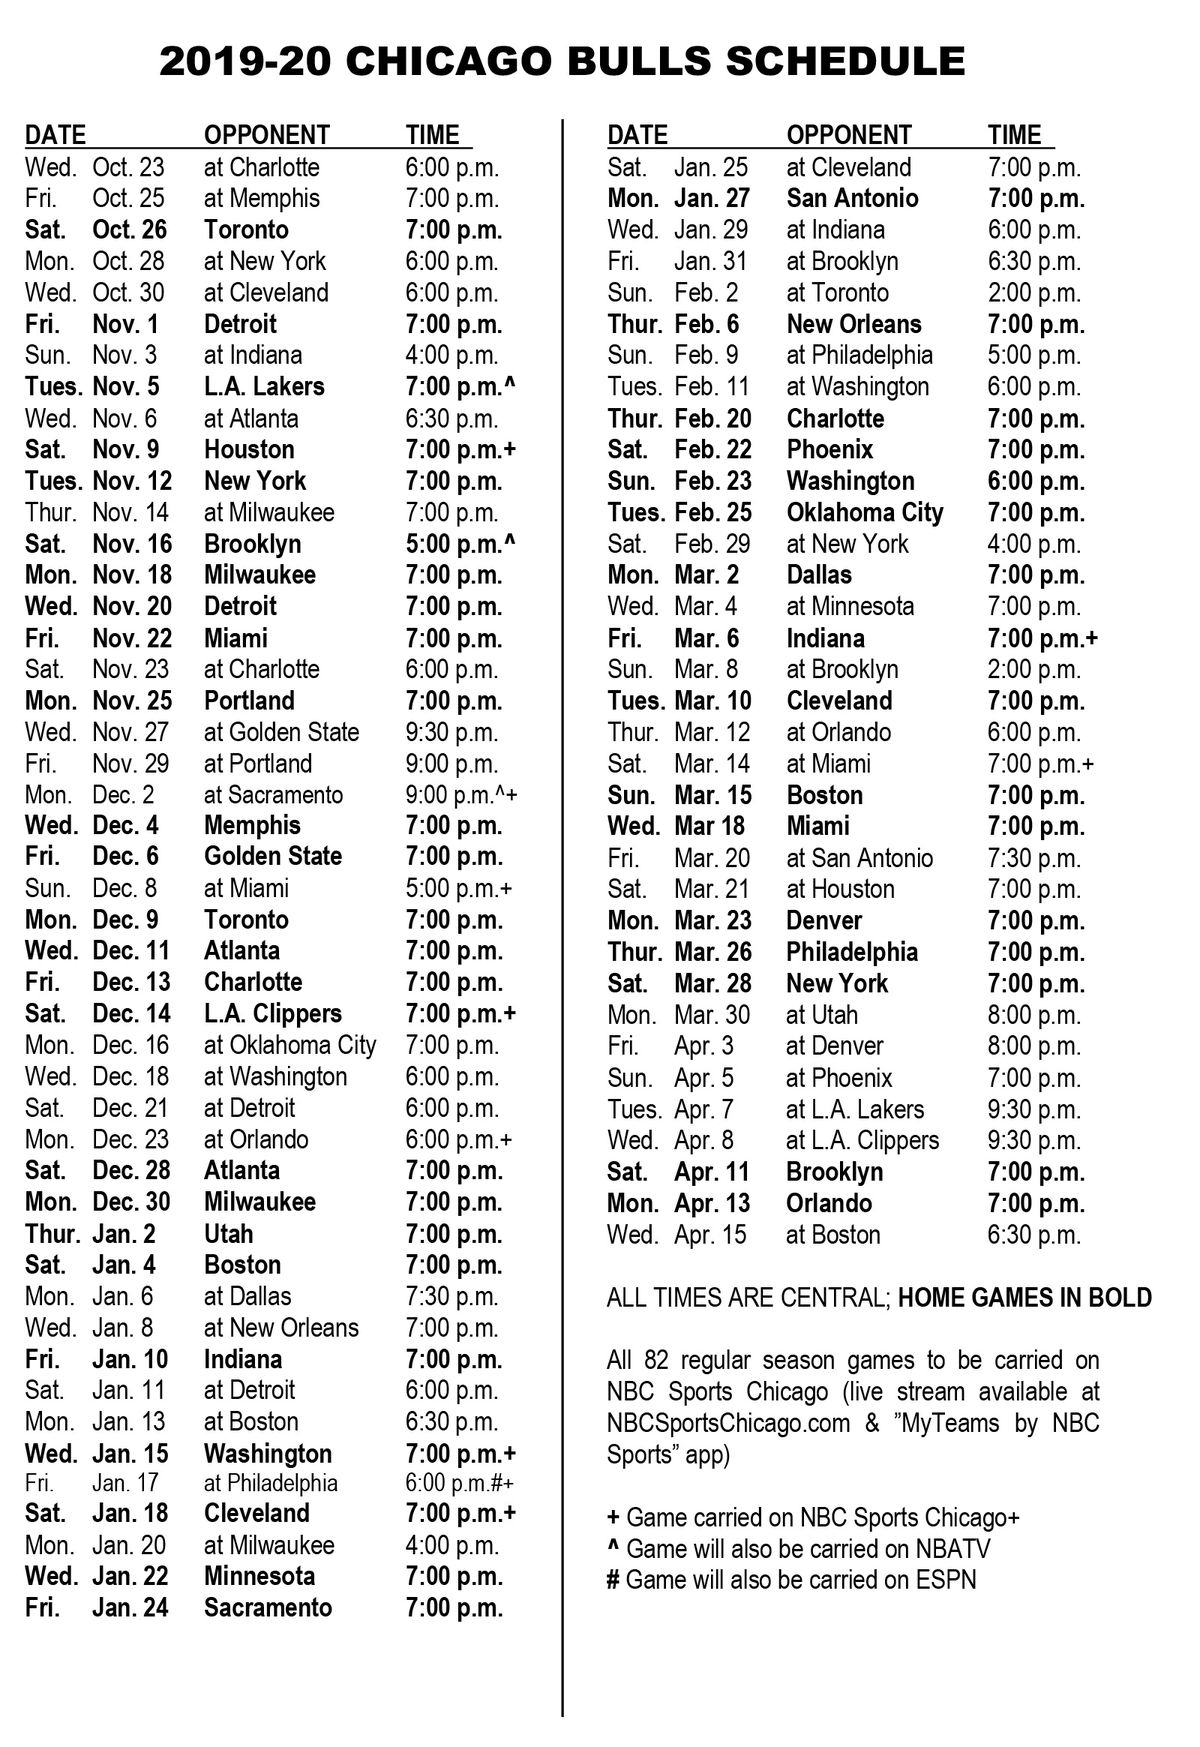 Chicago Bulls Schedule Here Are The Top 82 Games For The 